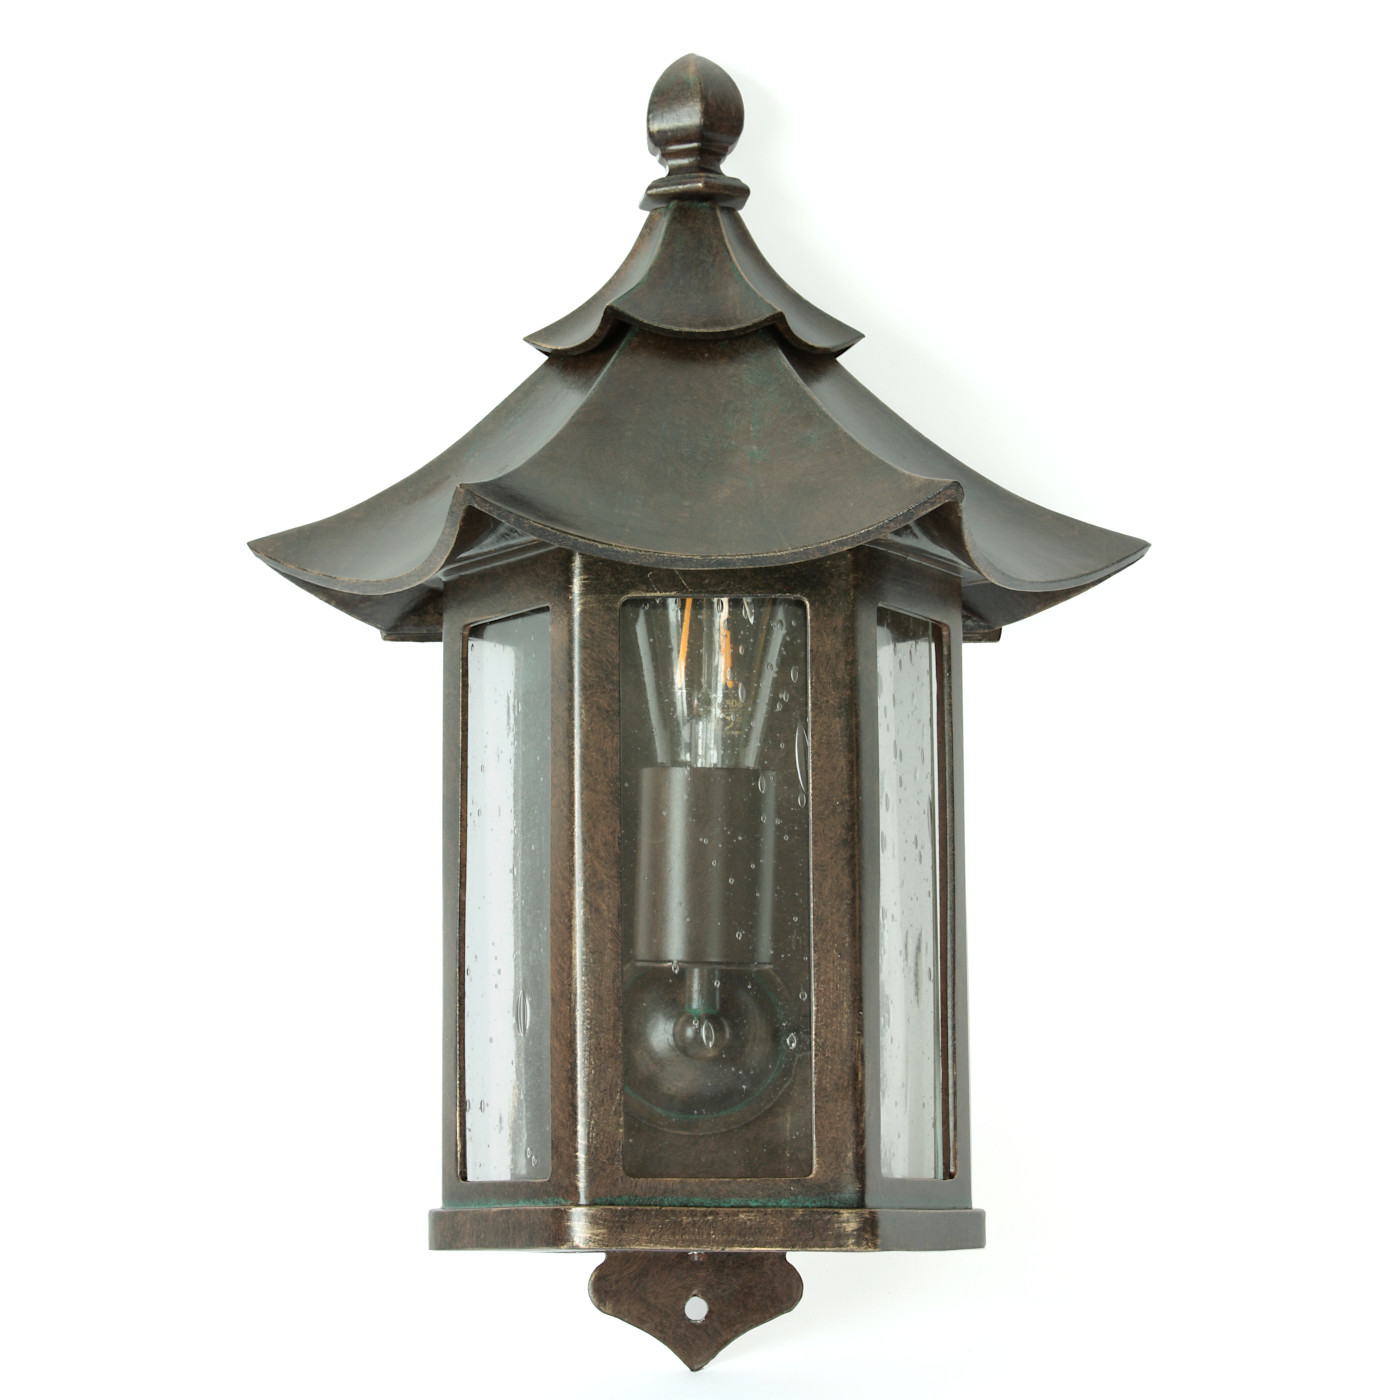 Hand-Forged Wall Light with Pagoda Roof WL 3172-N